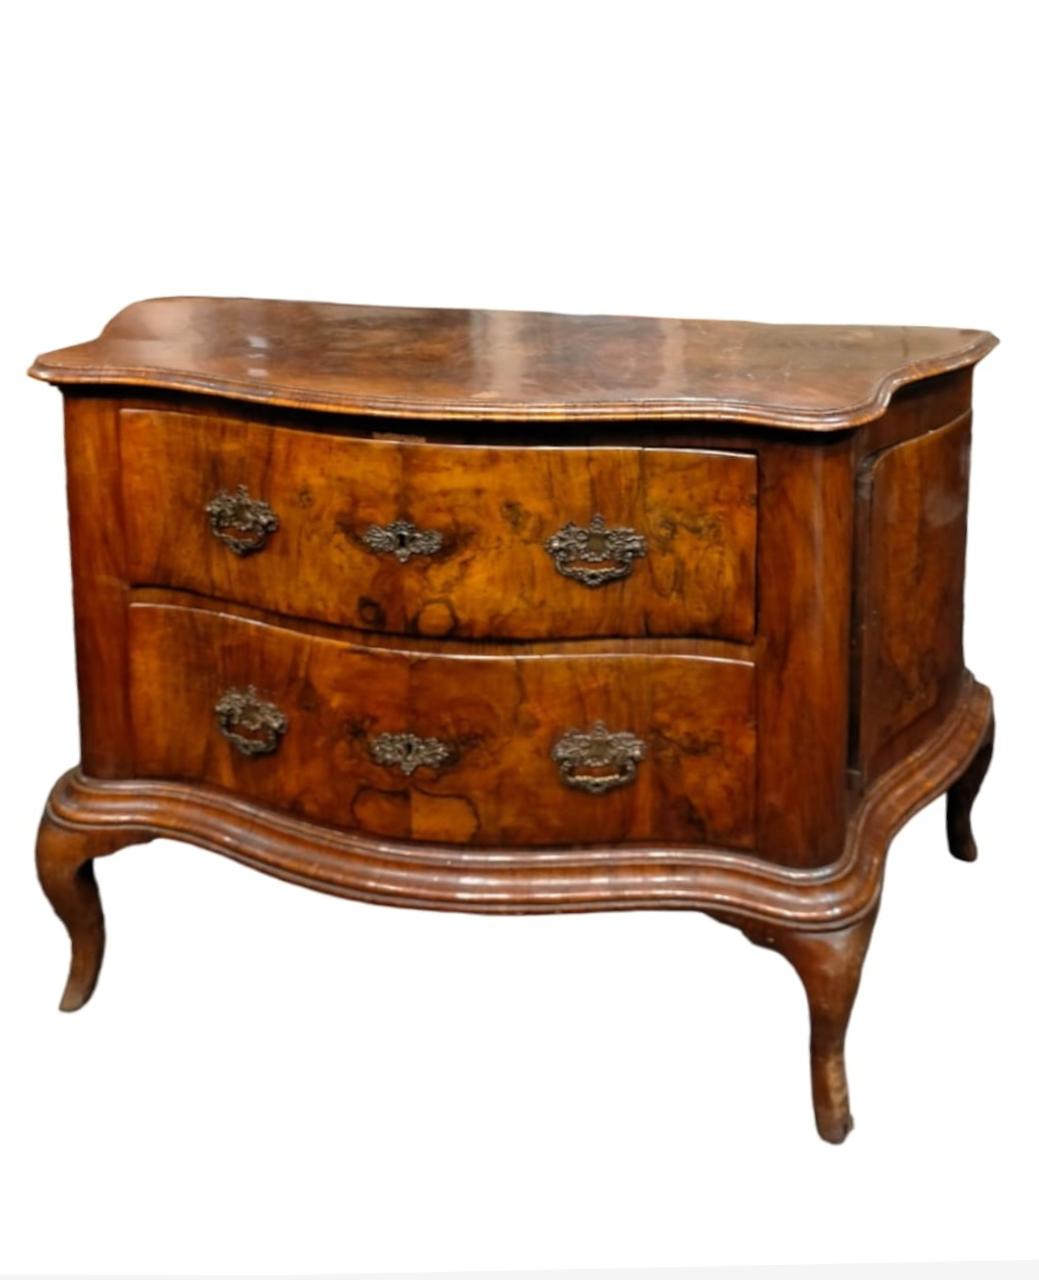 Important pair of 18th-century chest of drawers veneered in walnut burl and flamed walnut, with a patina.

Pair of Ferrarese (Italy) Louis XV chests of drawers
First half of the 1700s

Important pair of 18th-century chests of drawers veneered in